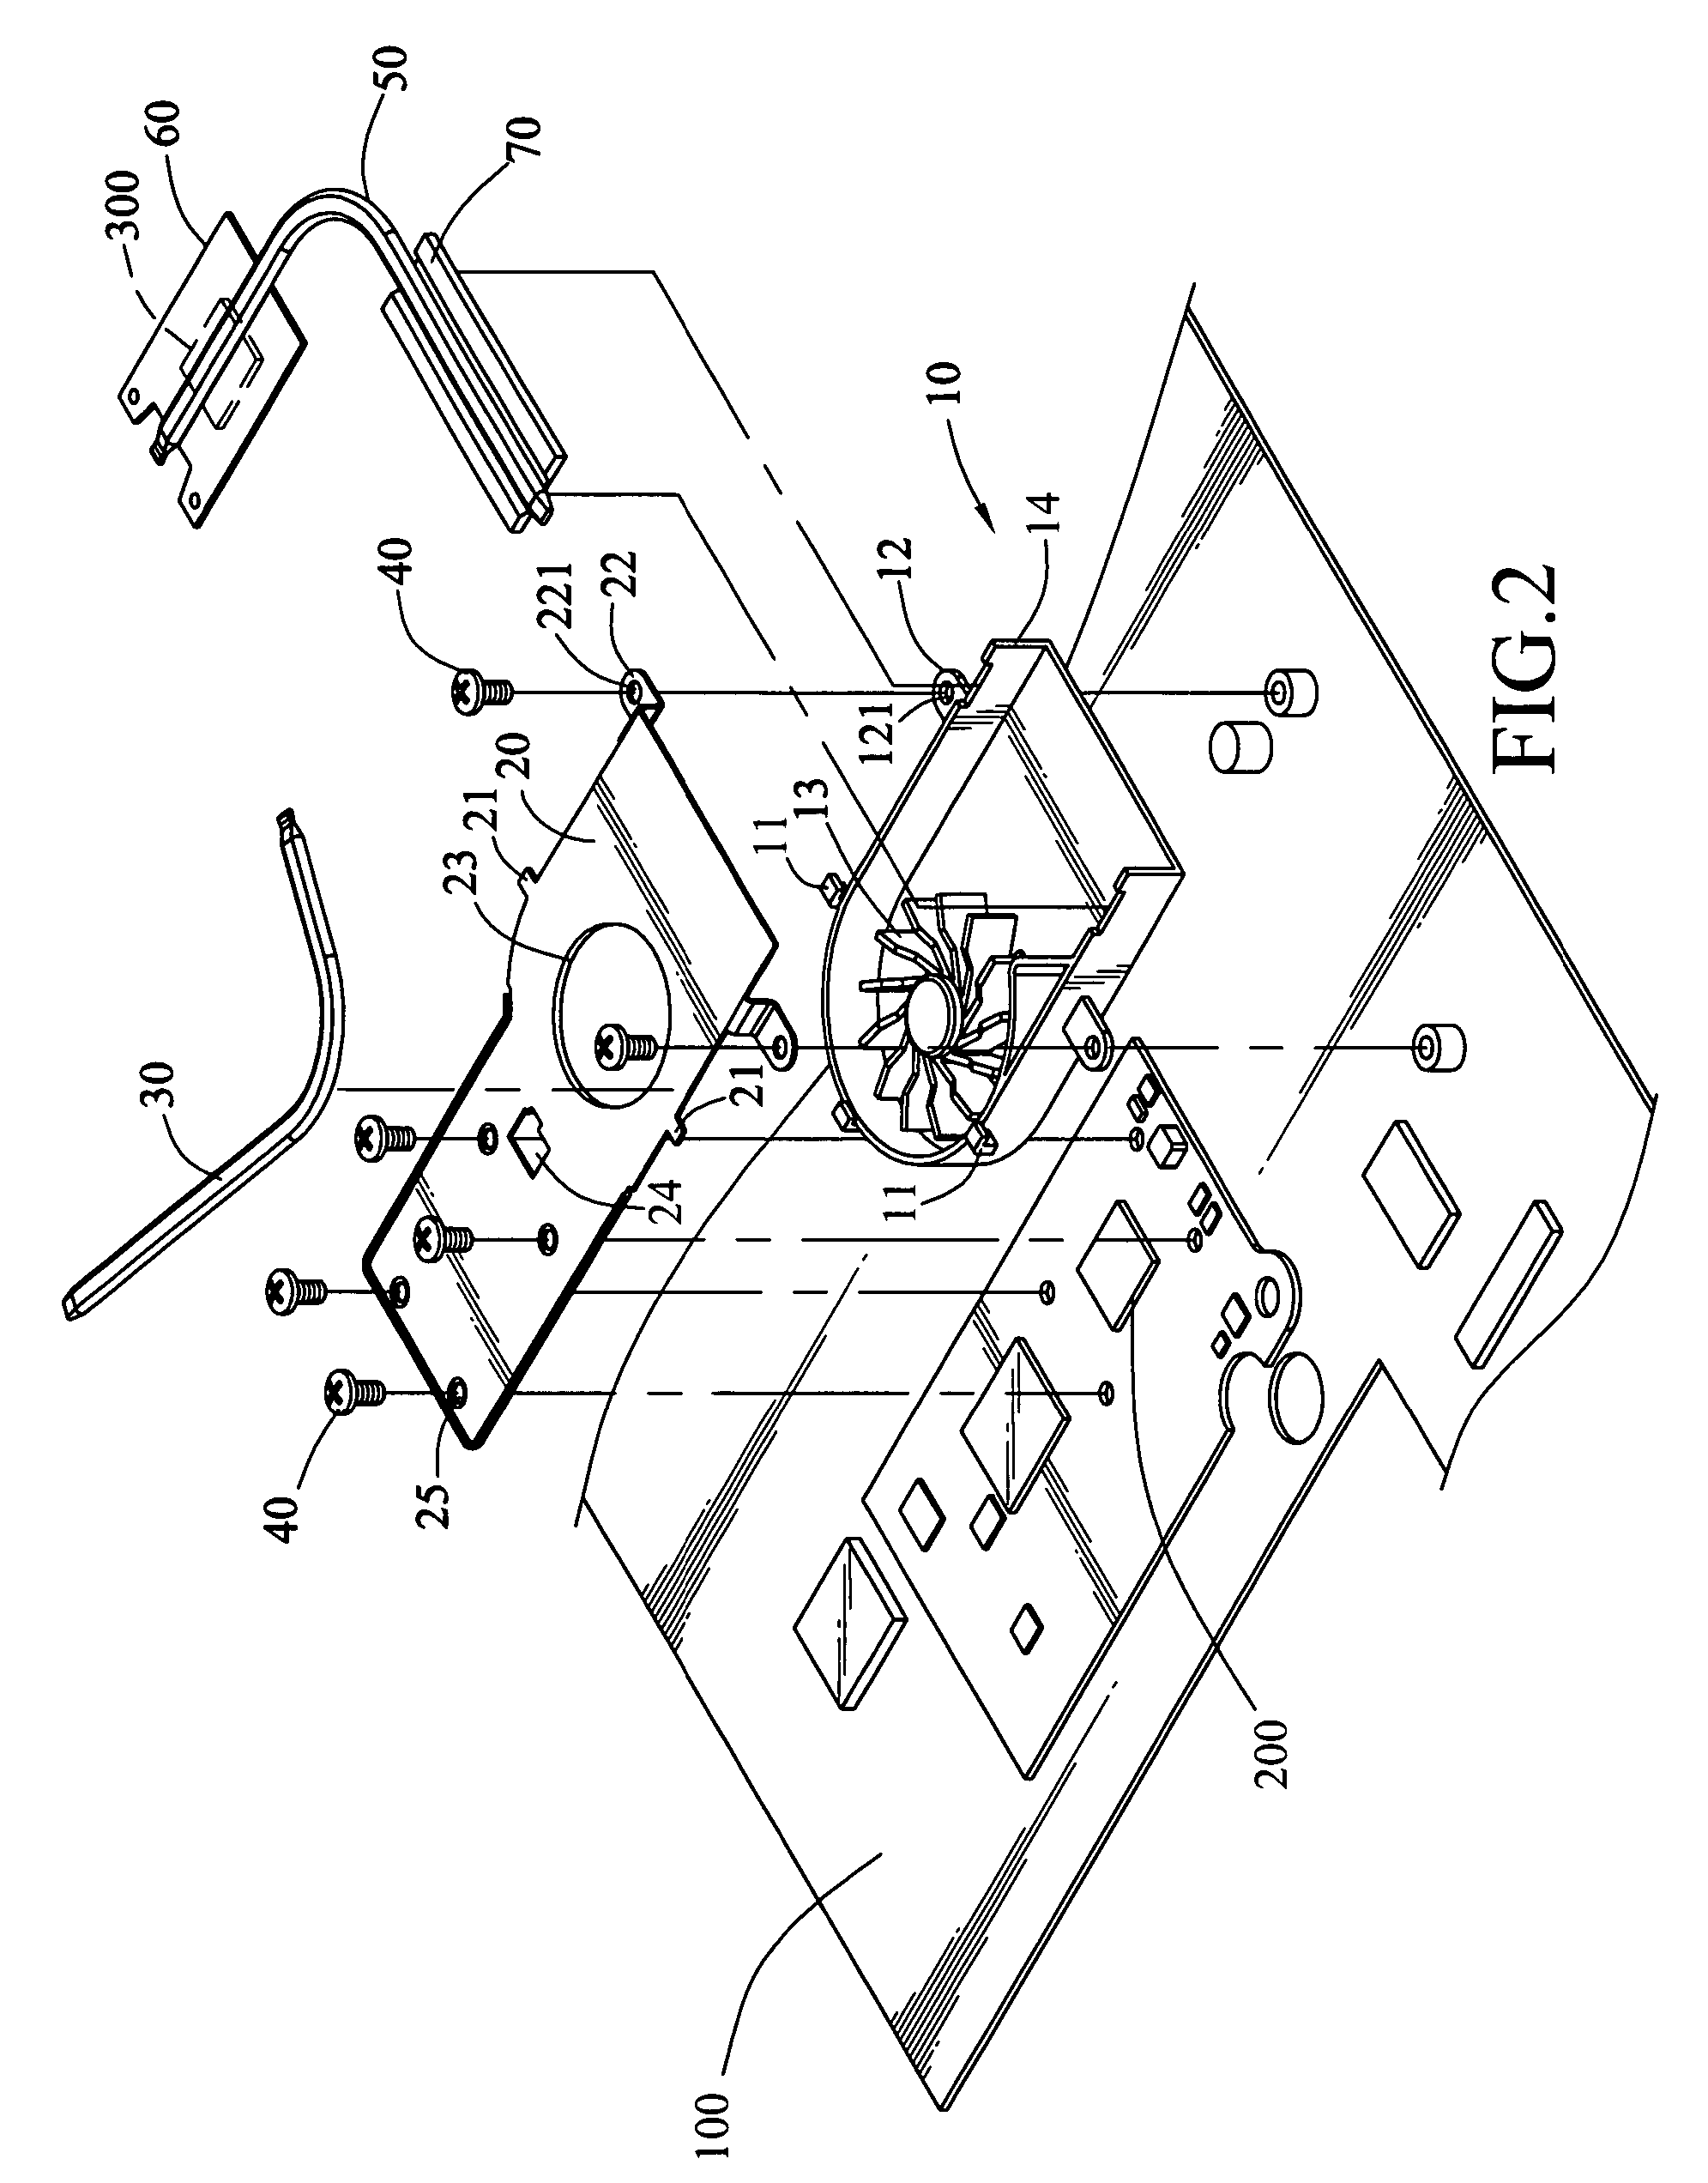 Heat sink module for dissipating heat from a heat source on a motherboard